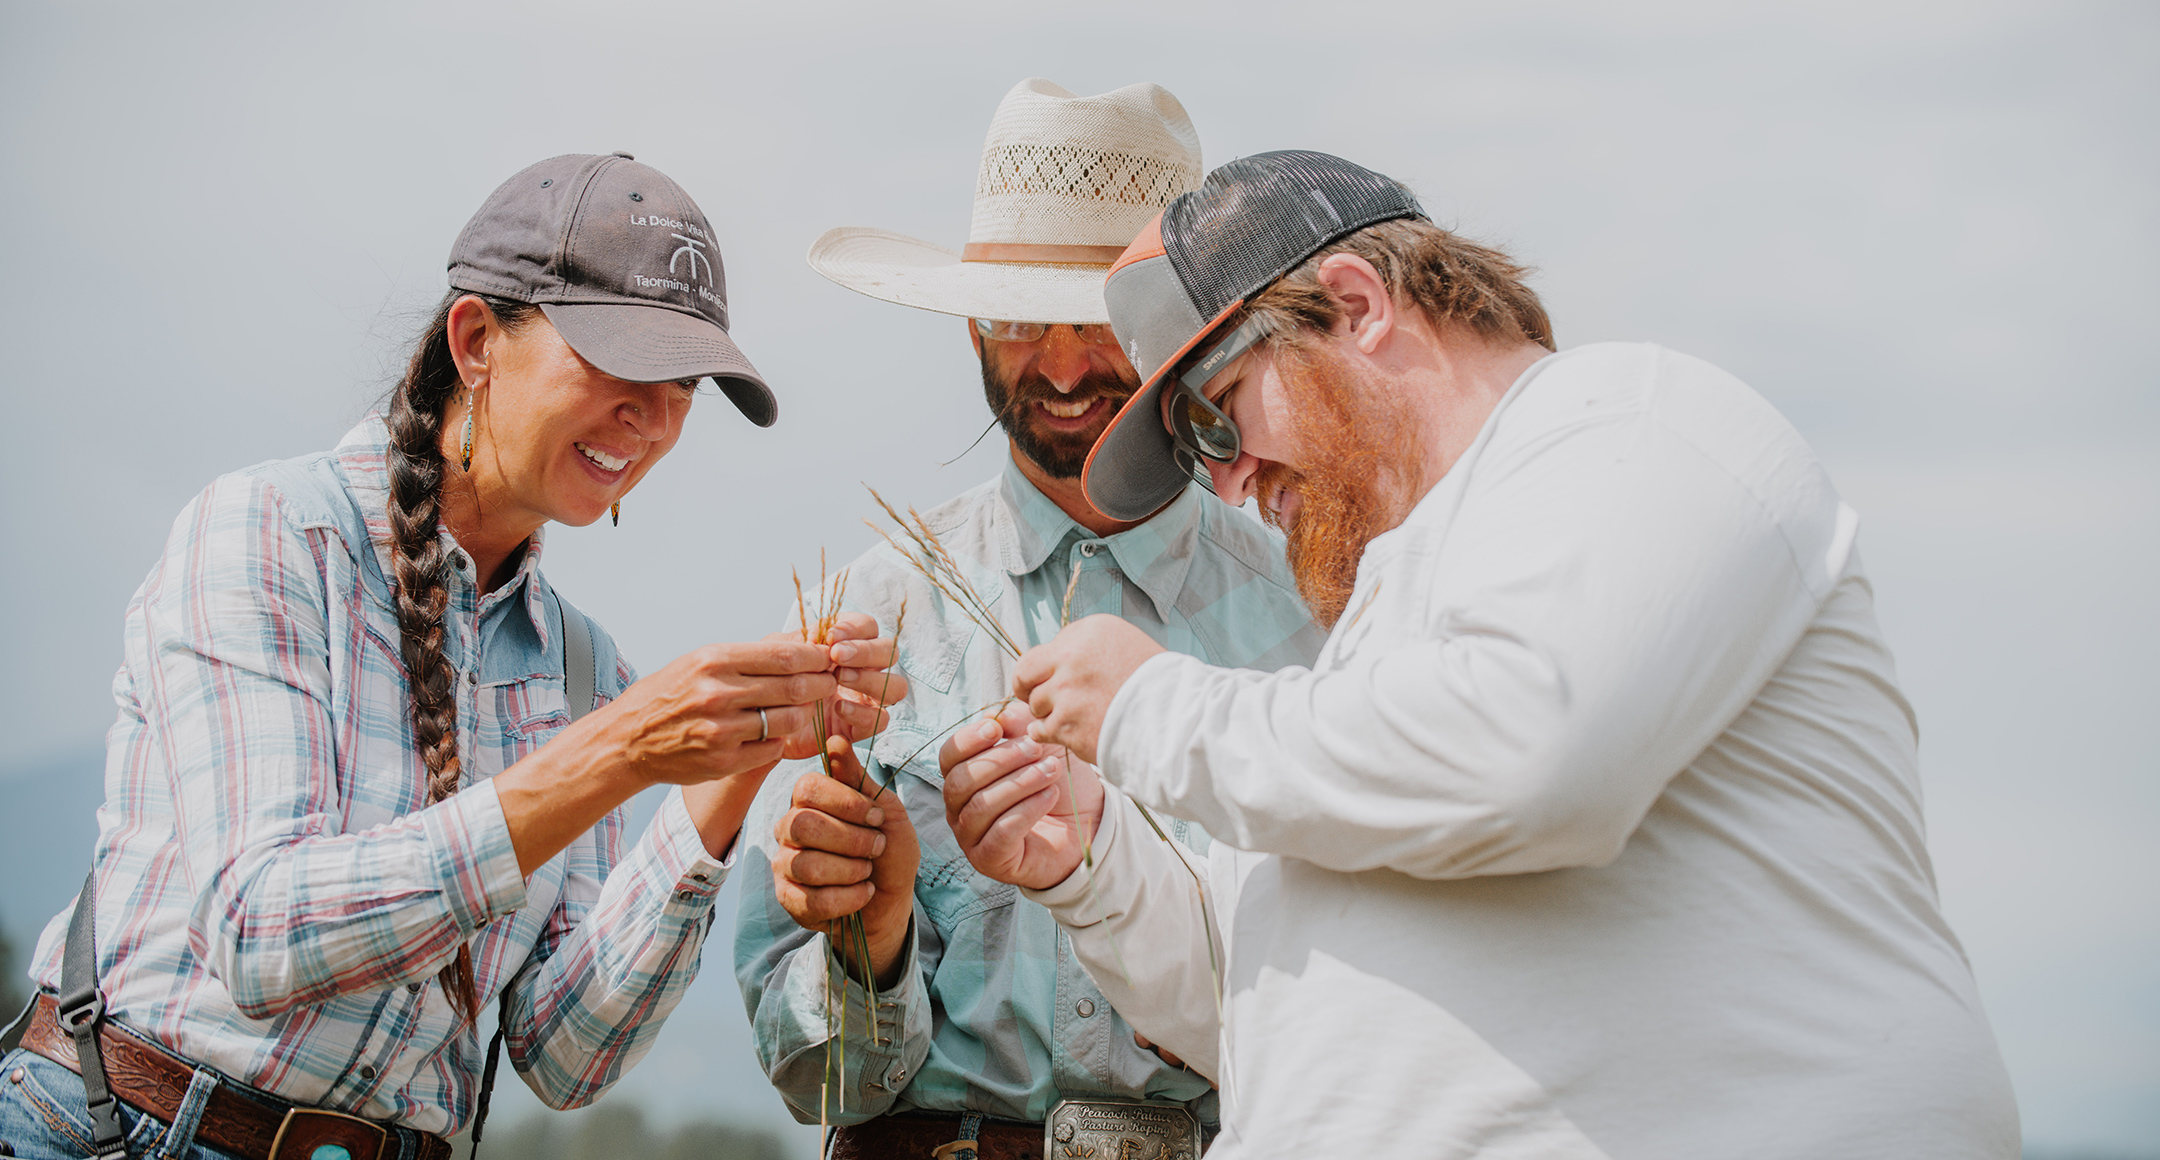 Three Country Natural Beef ranchers standing close together holding small strands of wheat.